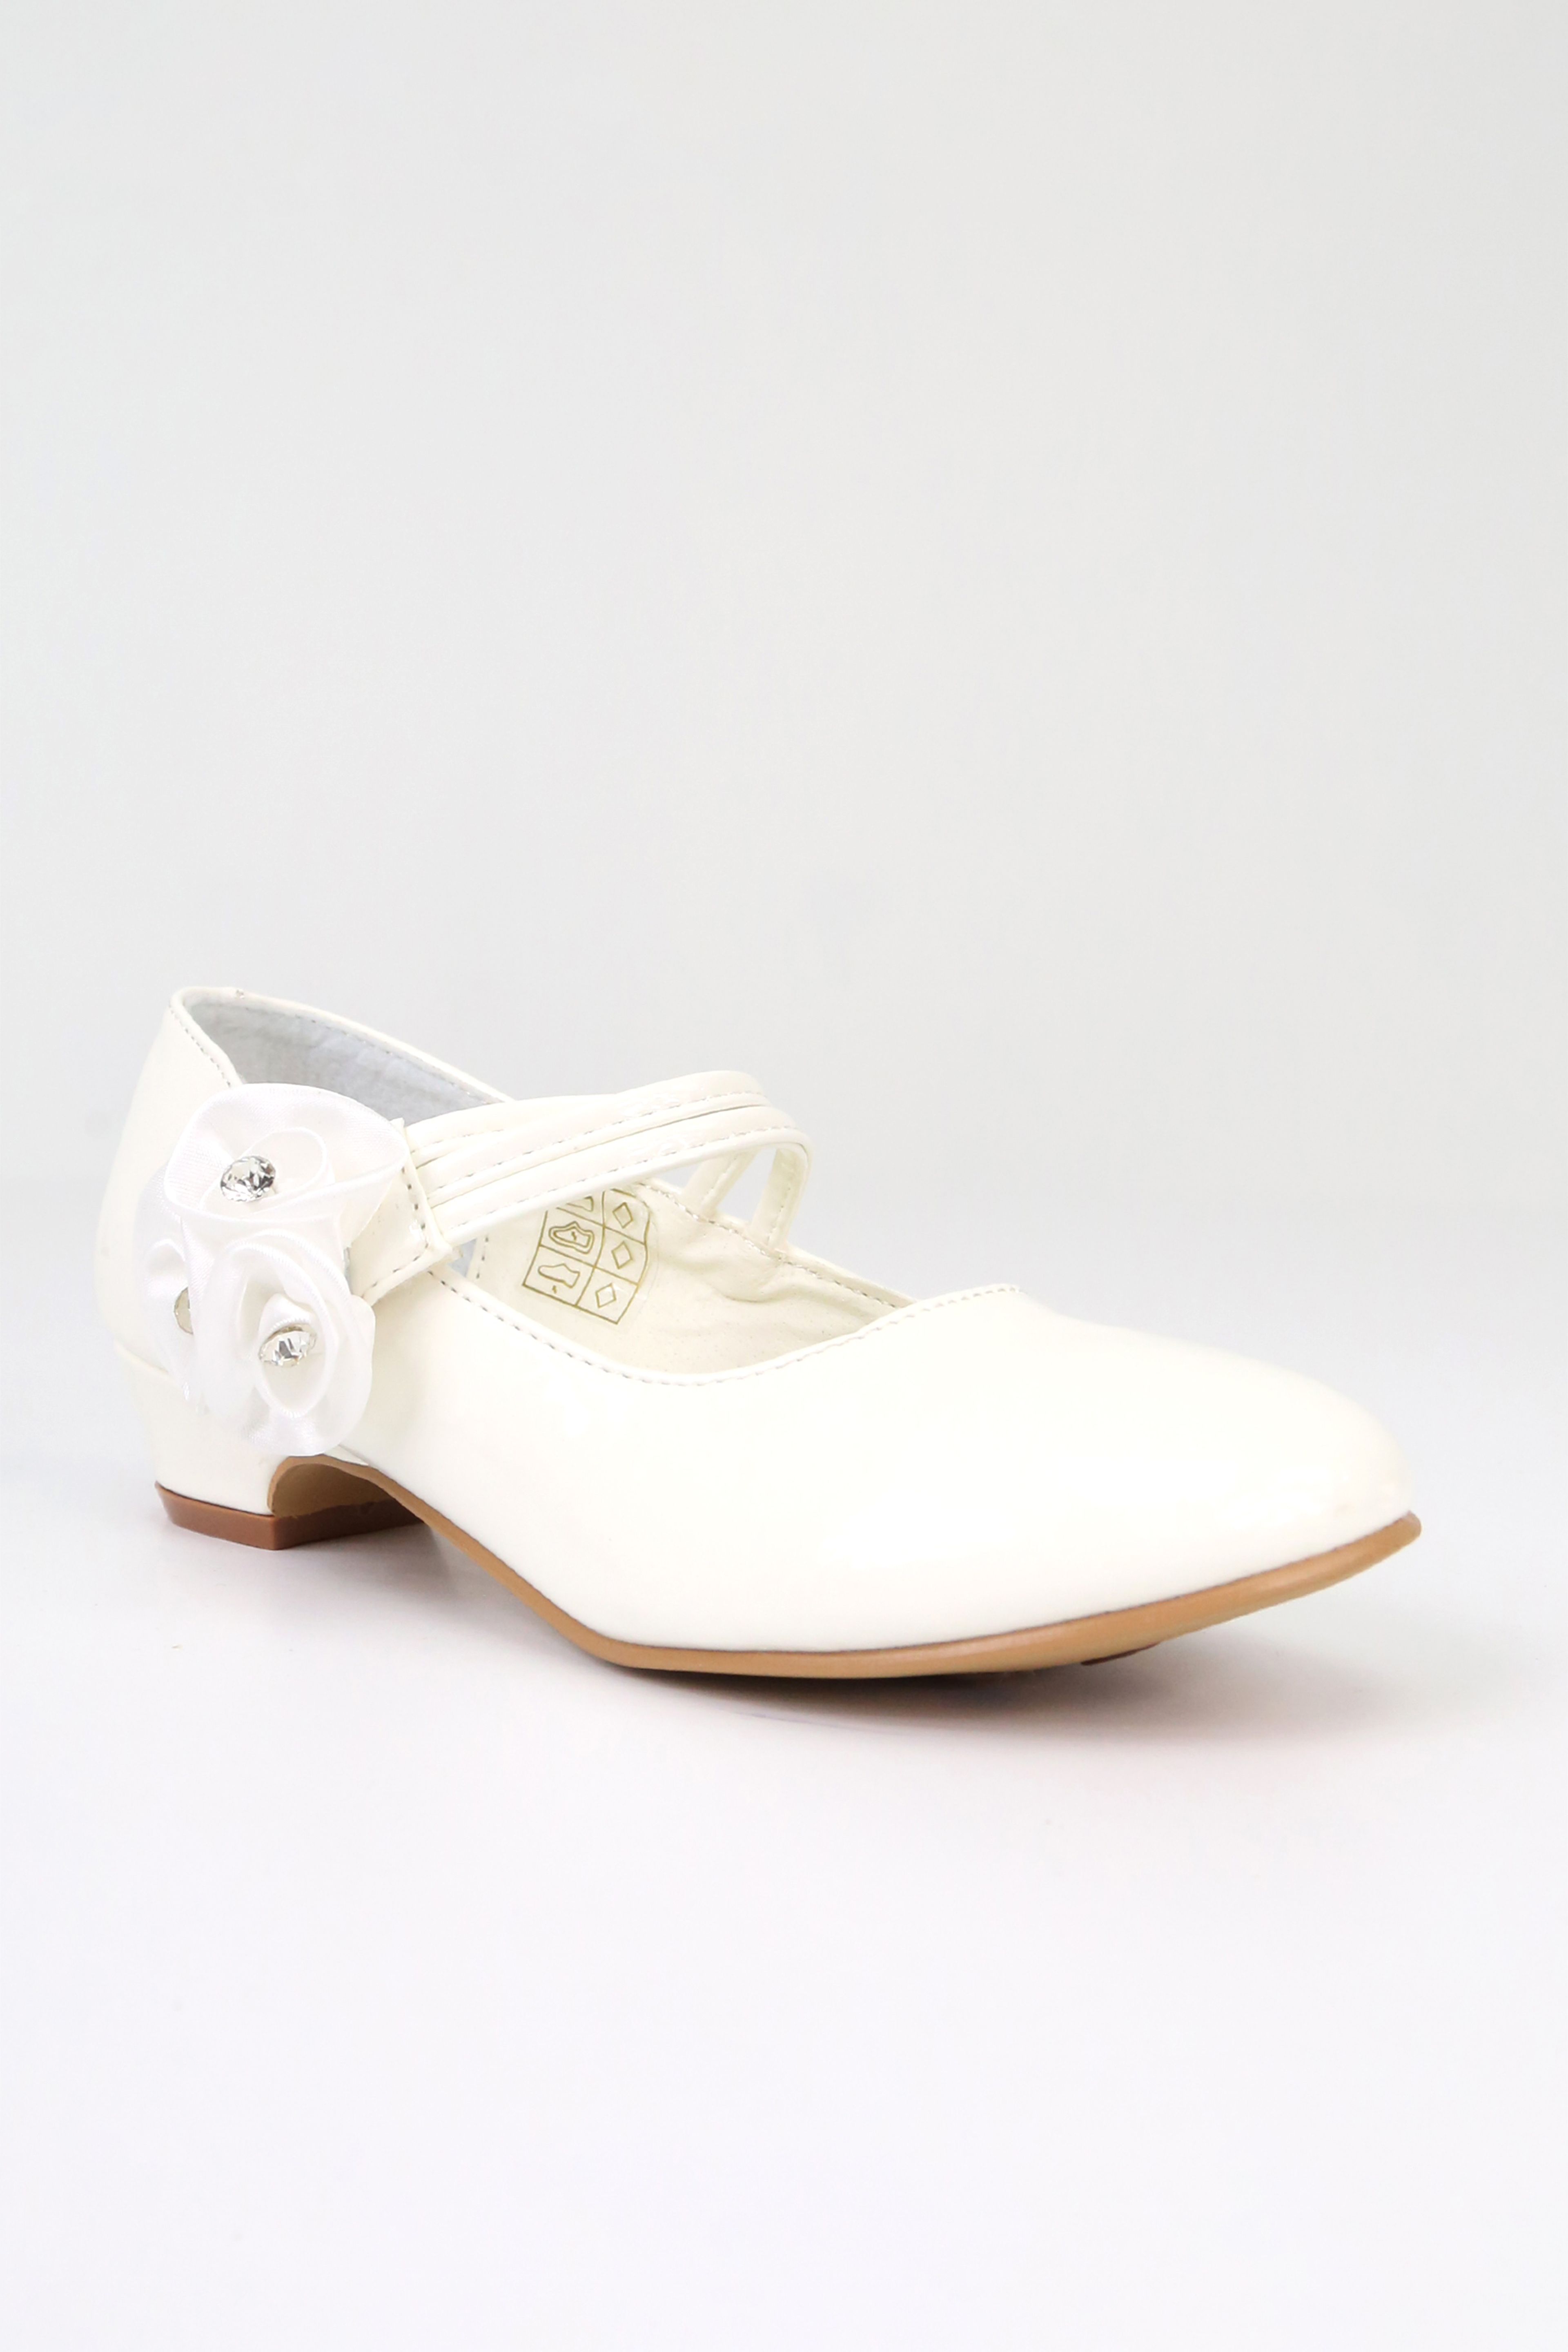 Girls' Mary Jane Low Heal Patent Dress shoes  - Ivoire